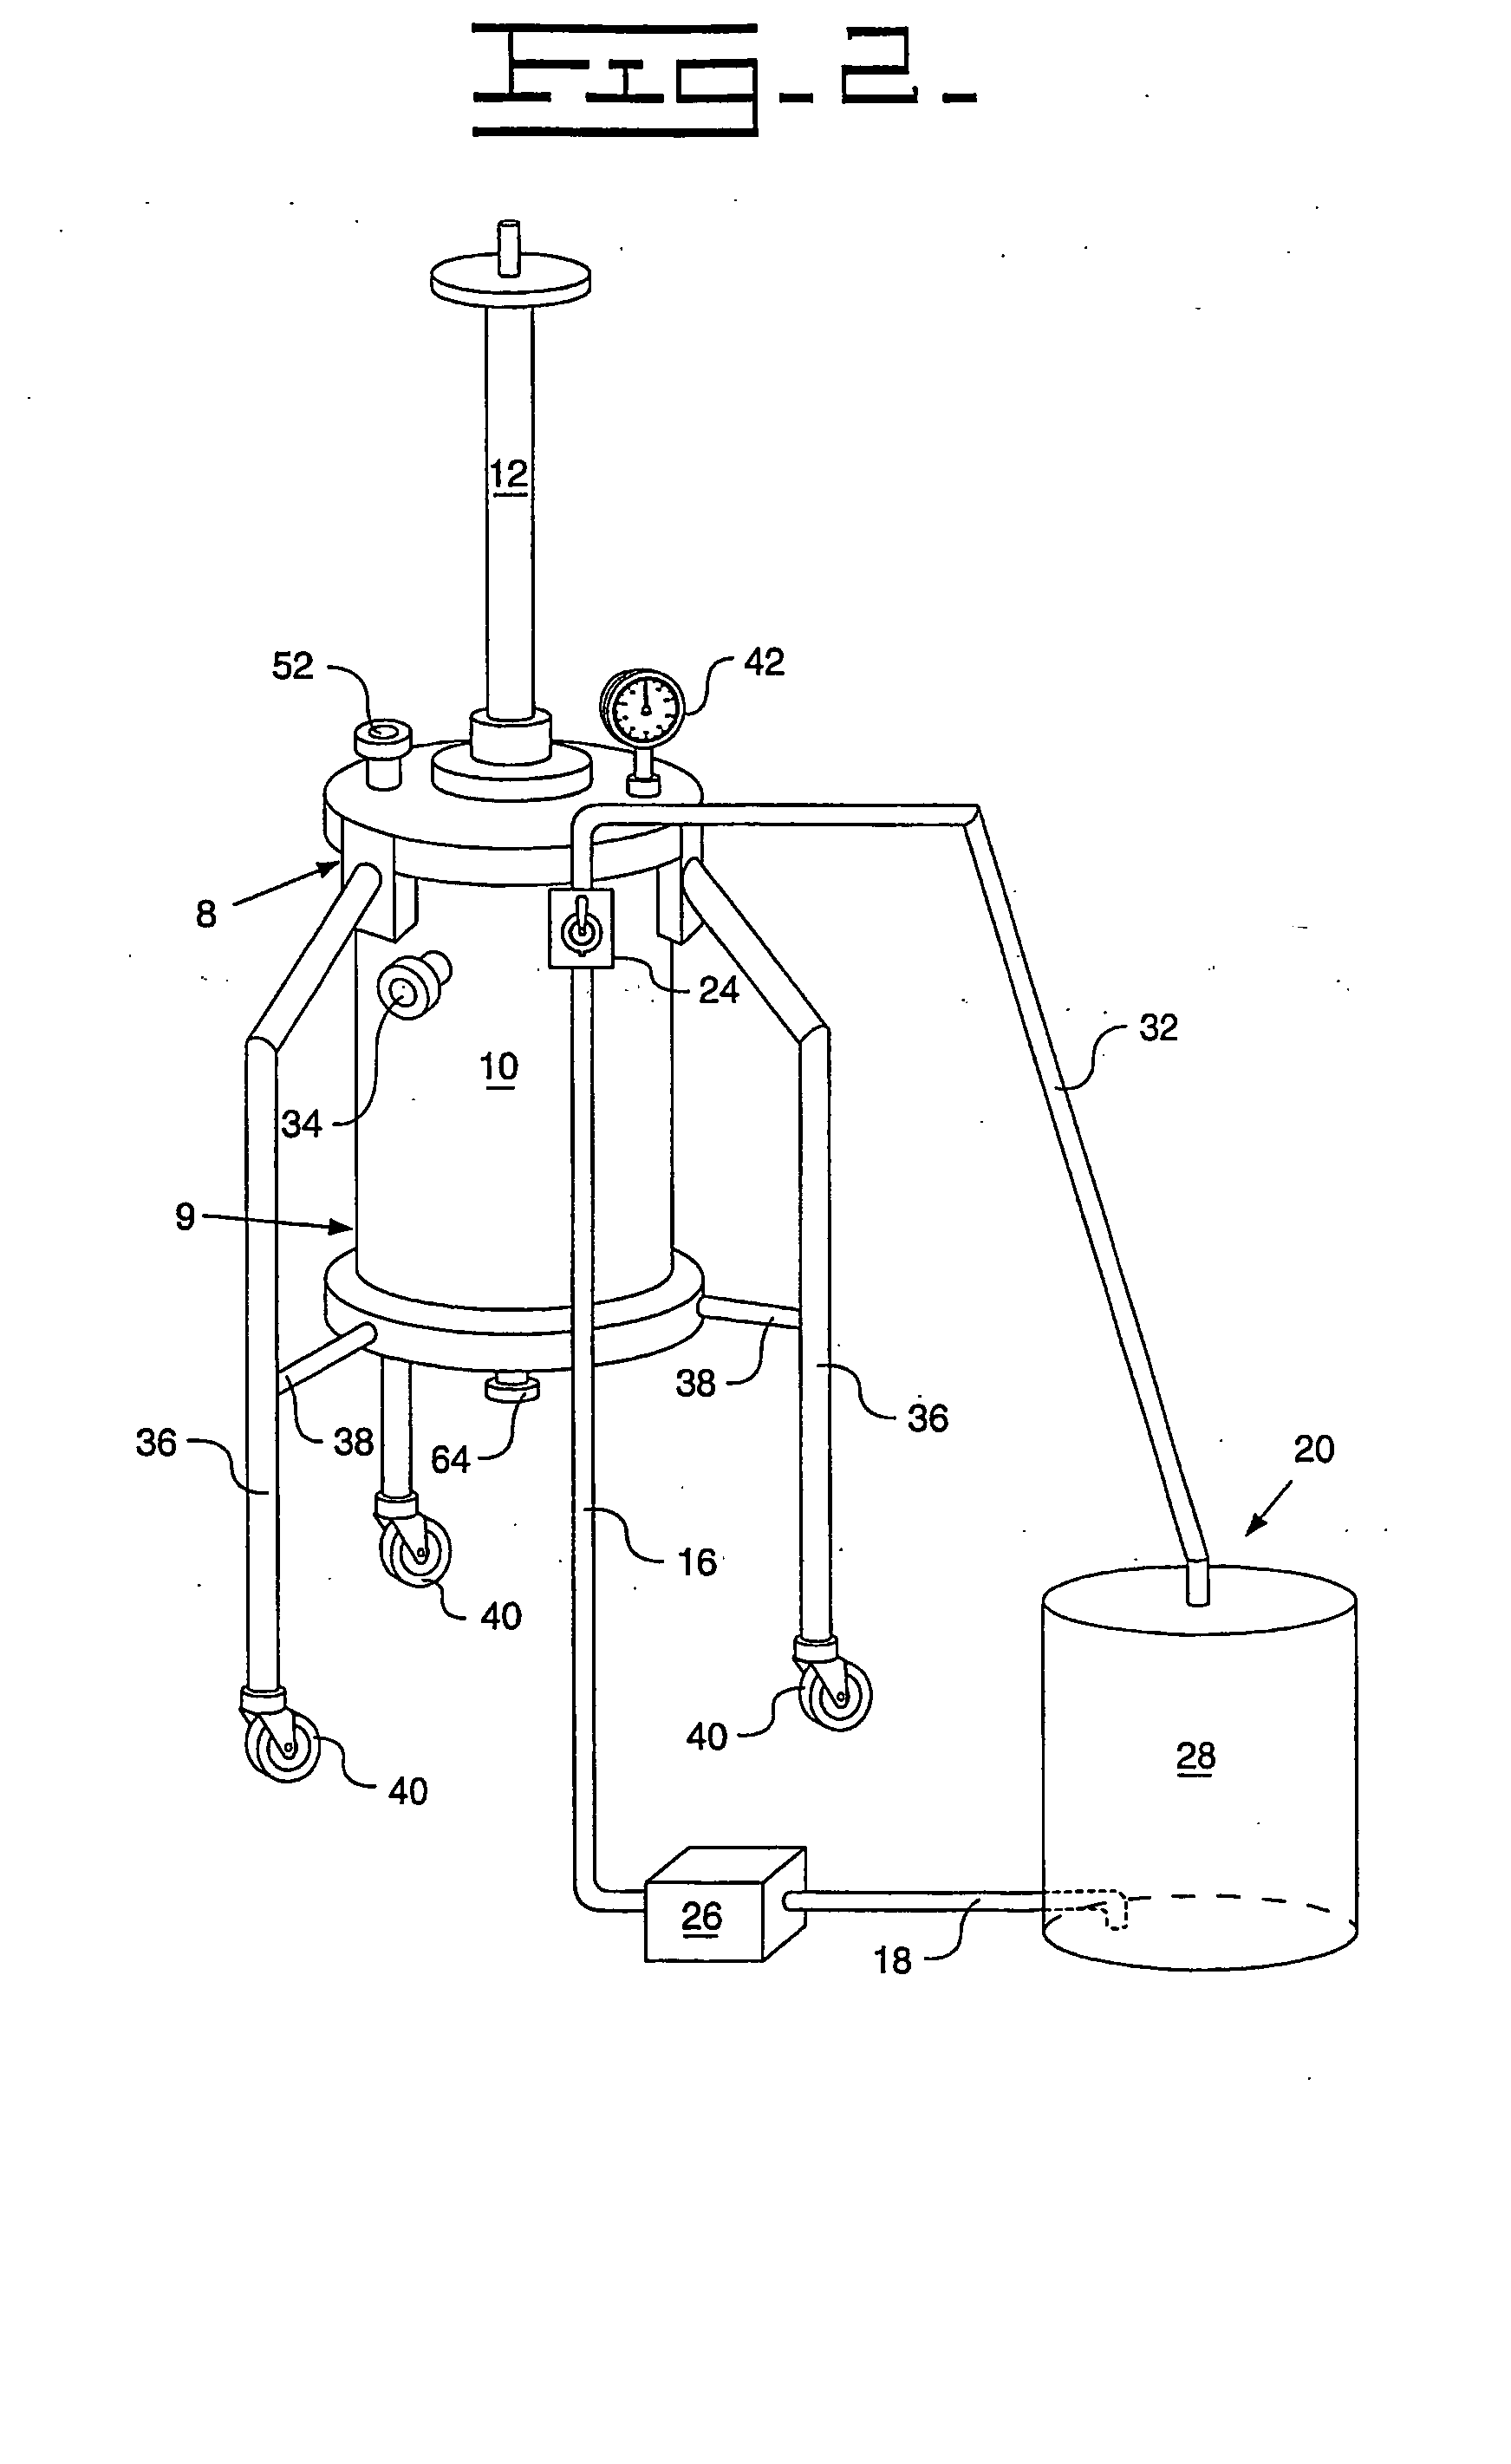 Method and system for separation and purification of at least one narcotic alkaloid using reverse phase preparative chromatography